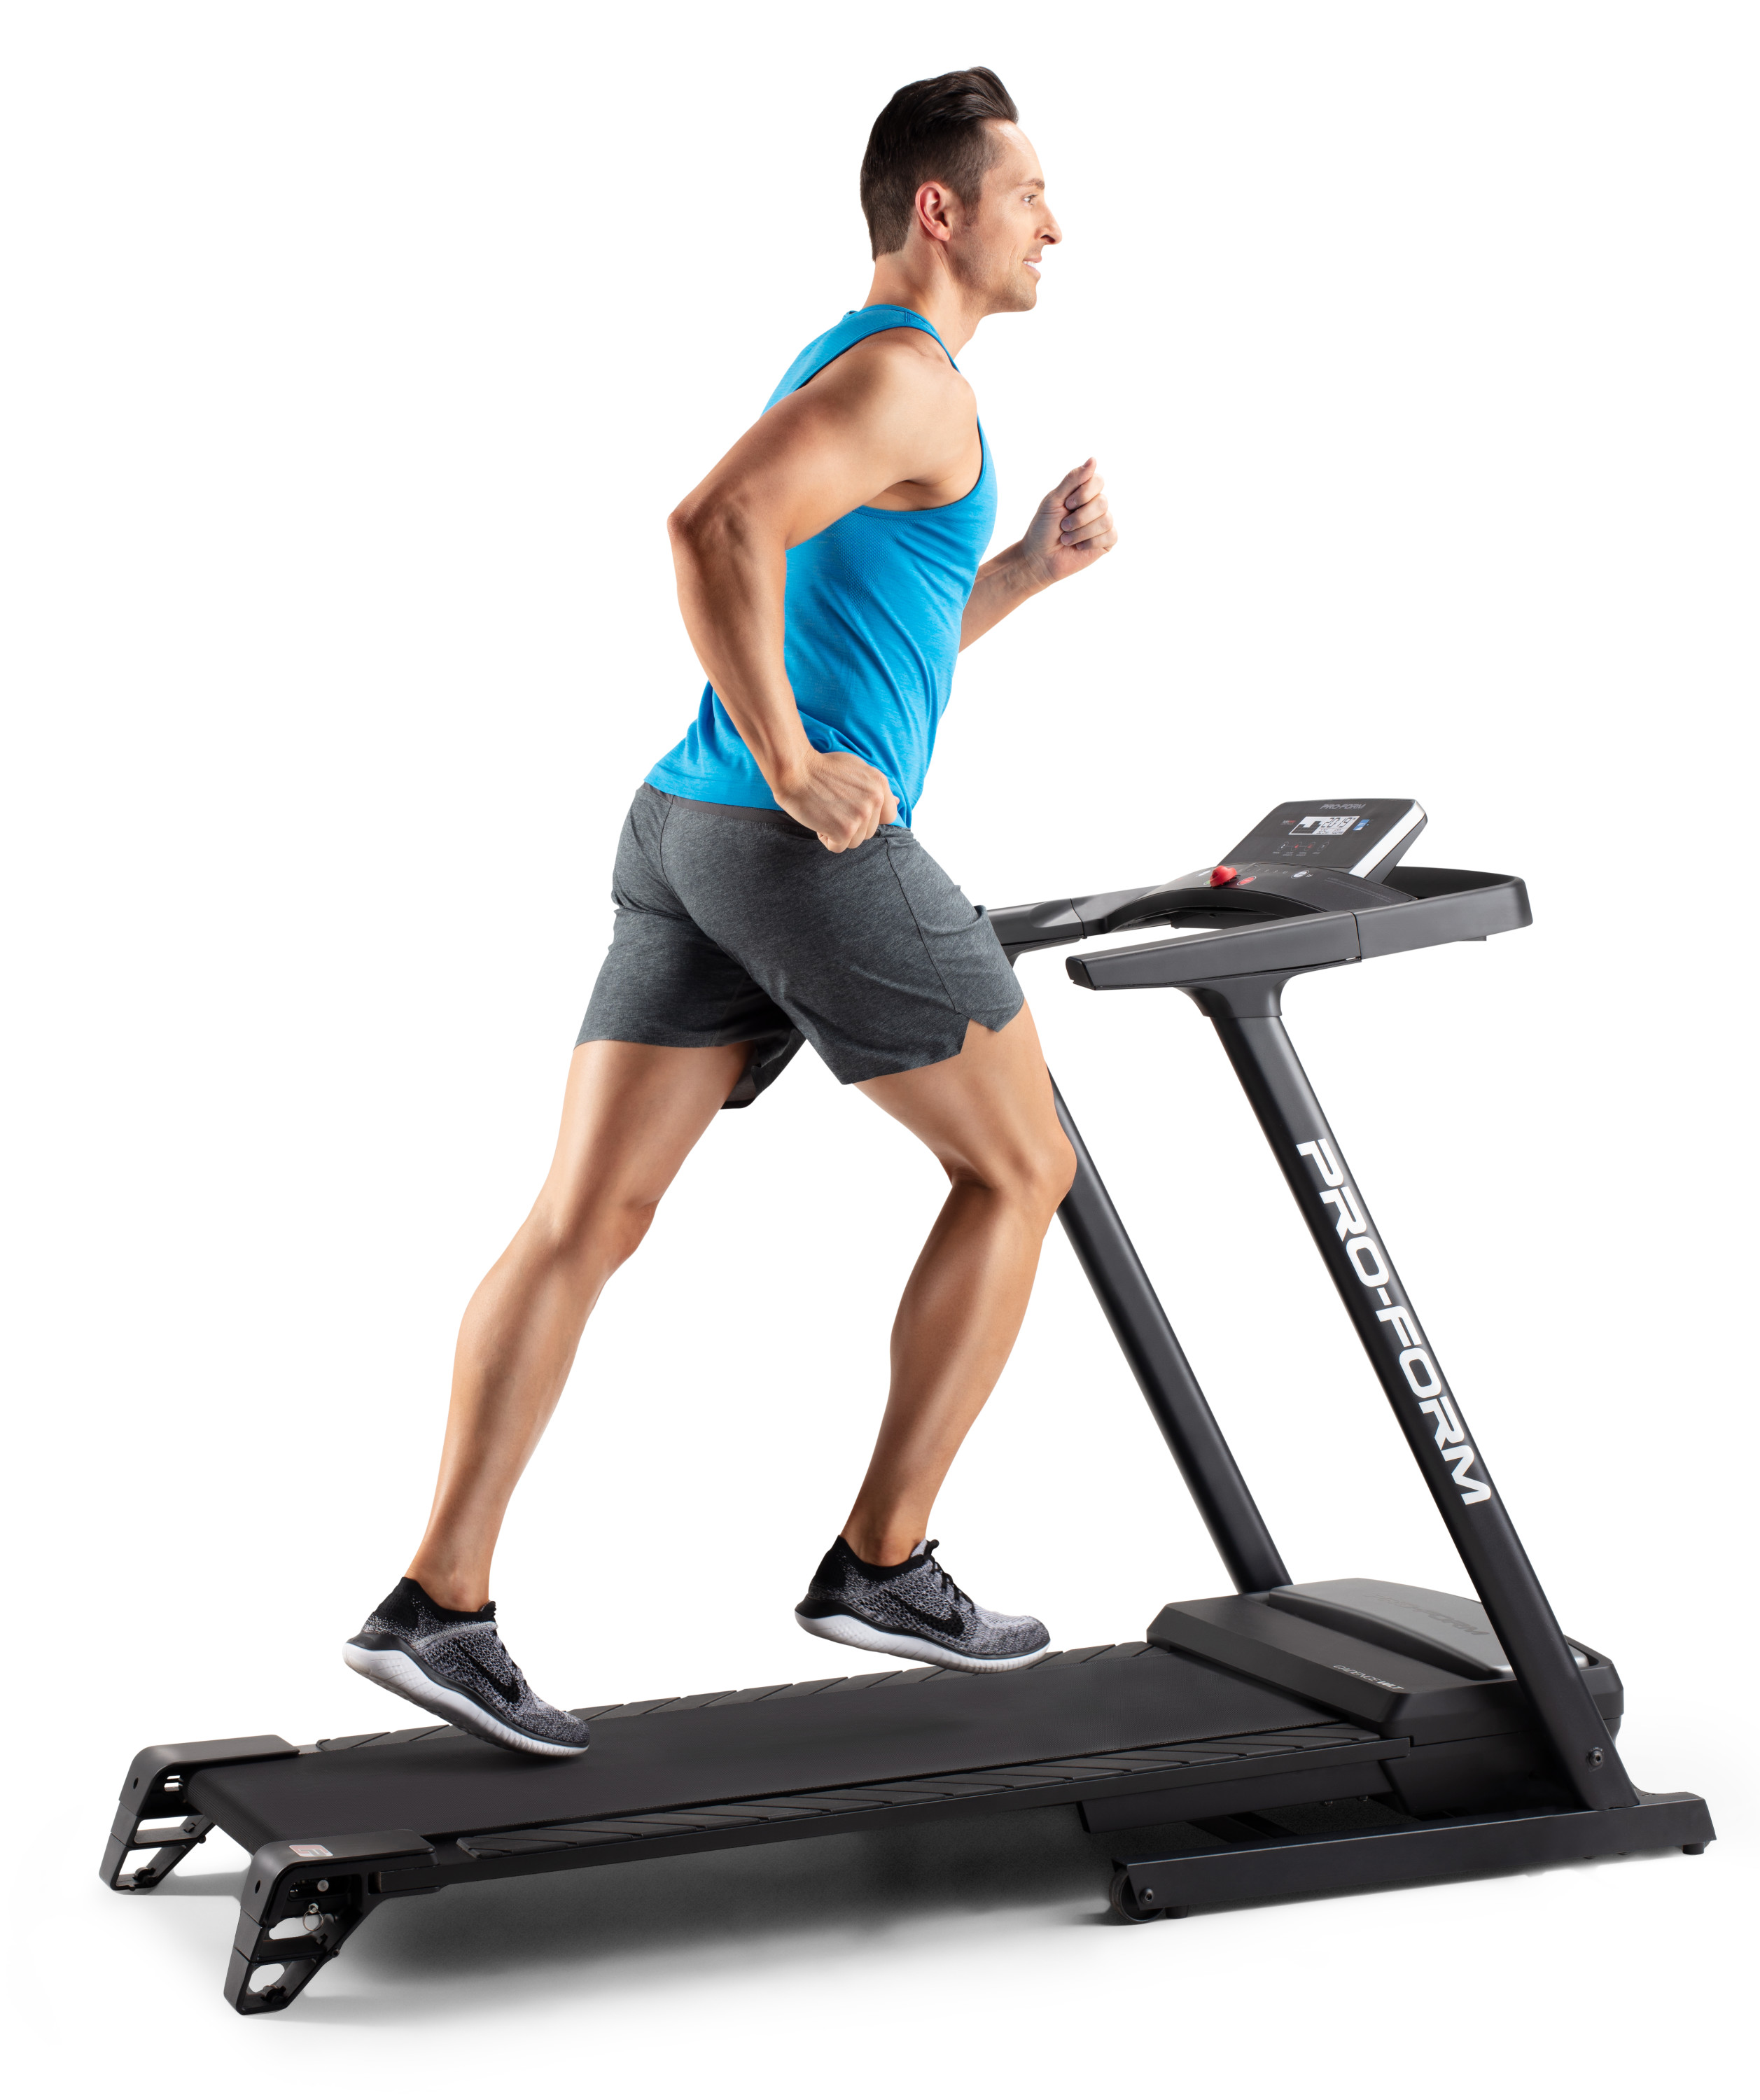 ProForm Cadence WLT Folding Treadmill with Reflex Deck for Walking and Jogging, iFit Bluetooth Enabled - image 25 of 31